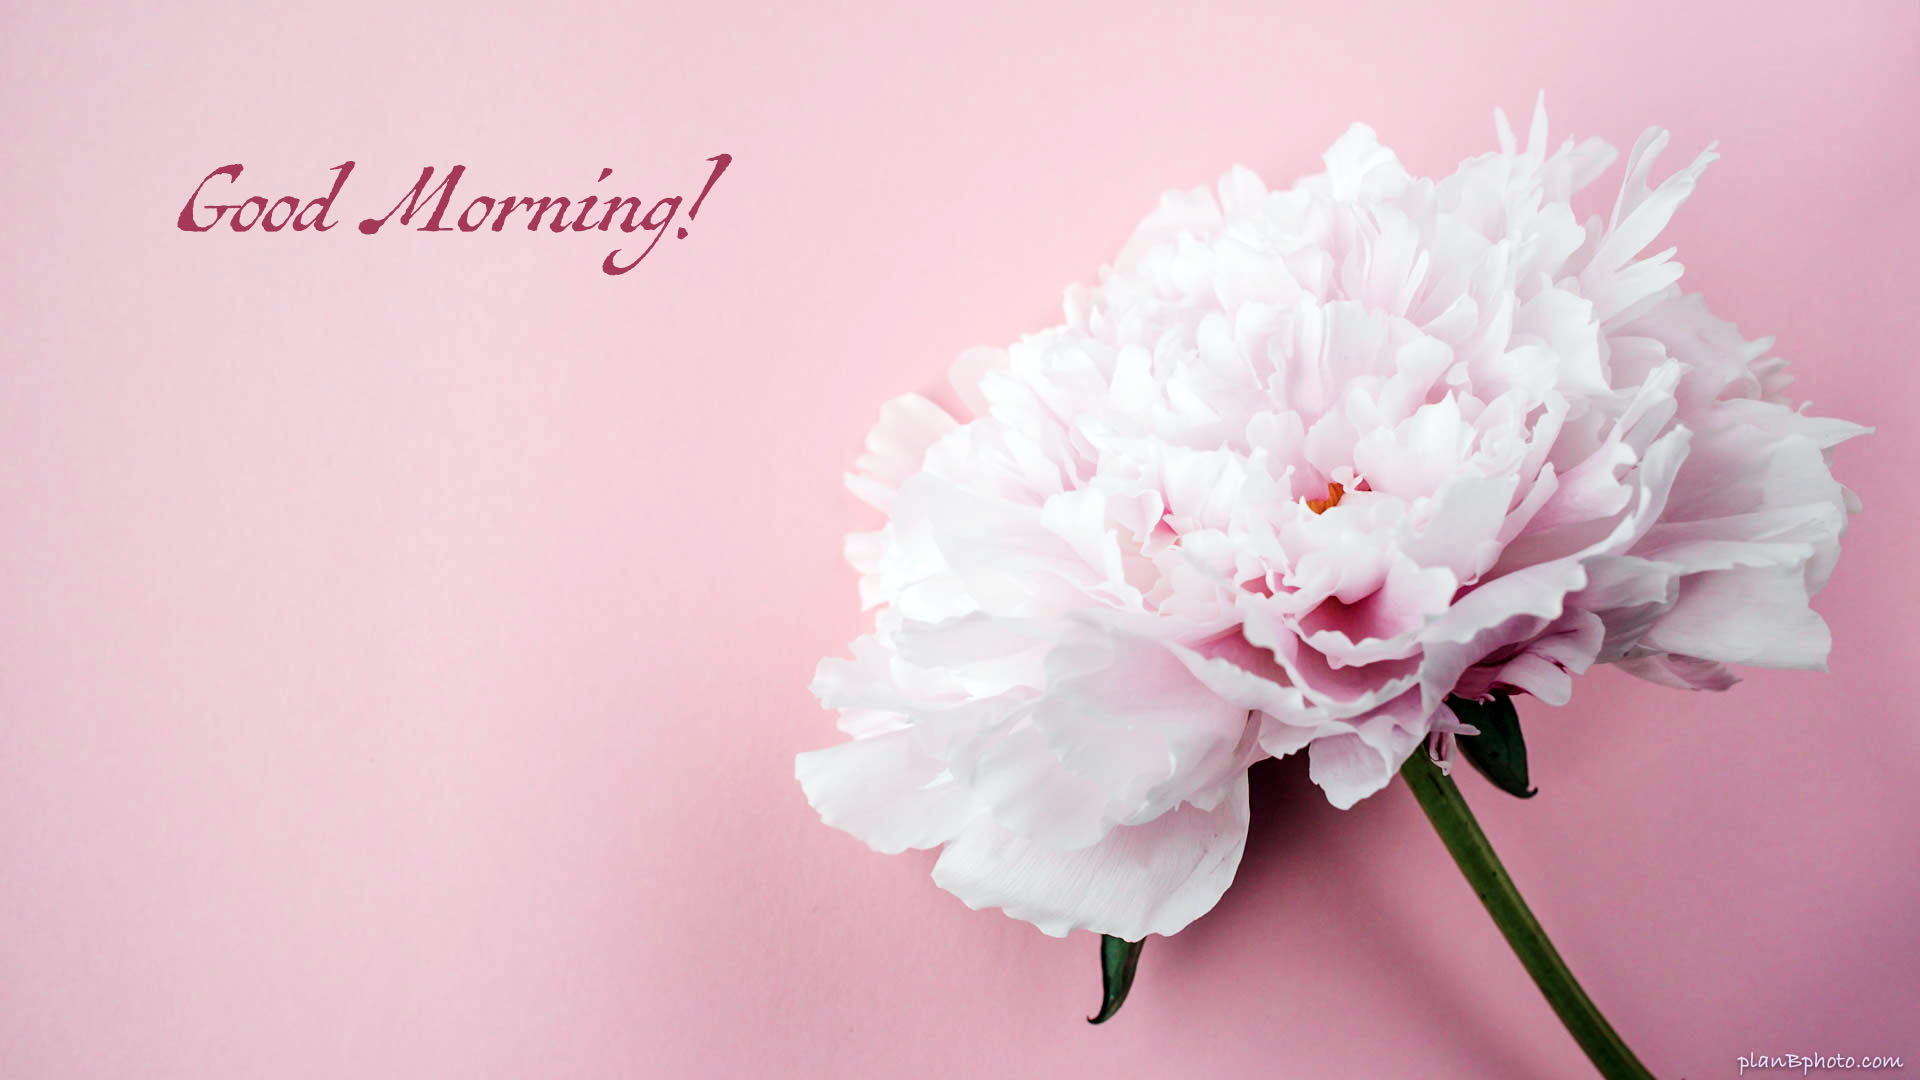 Good Morning image with pink peony flower